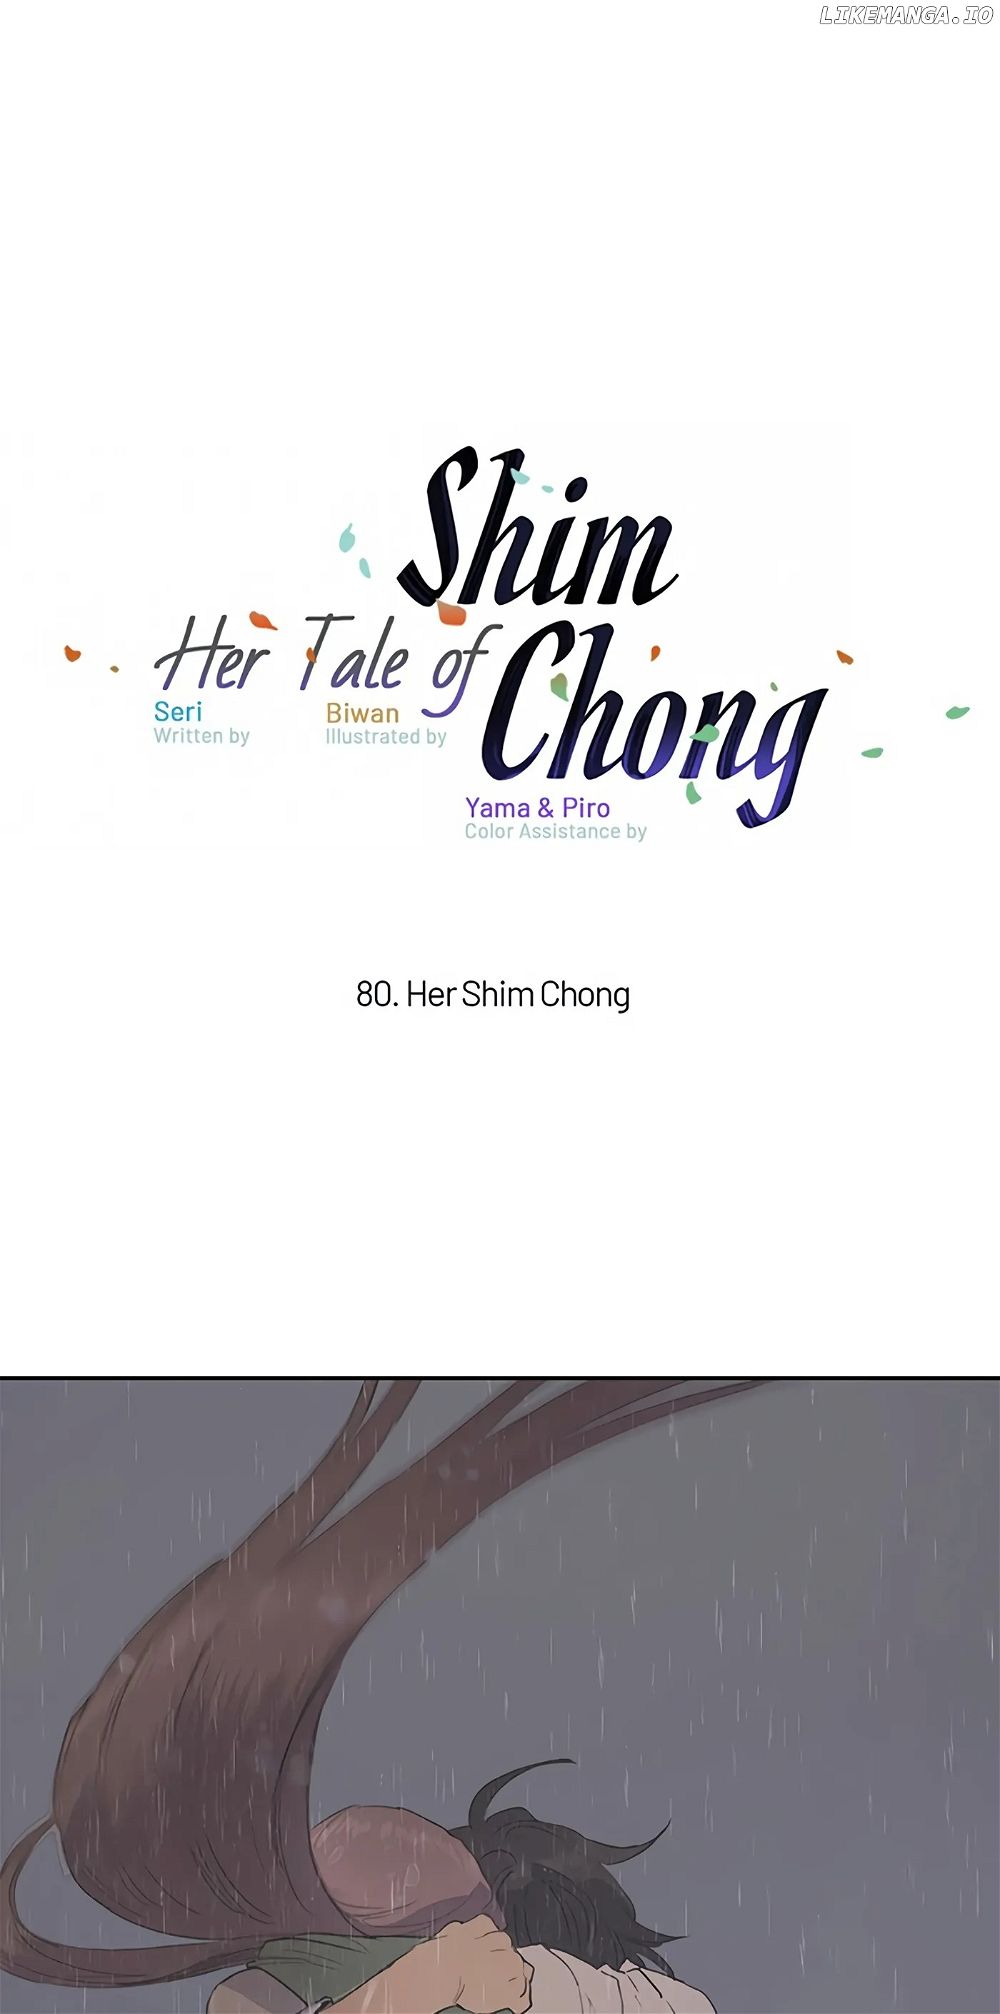 Her Tale of Shim Chong Chapter 80 - Page 1